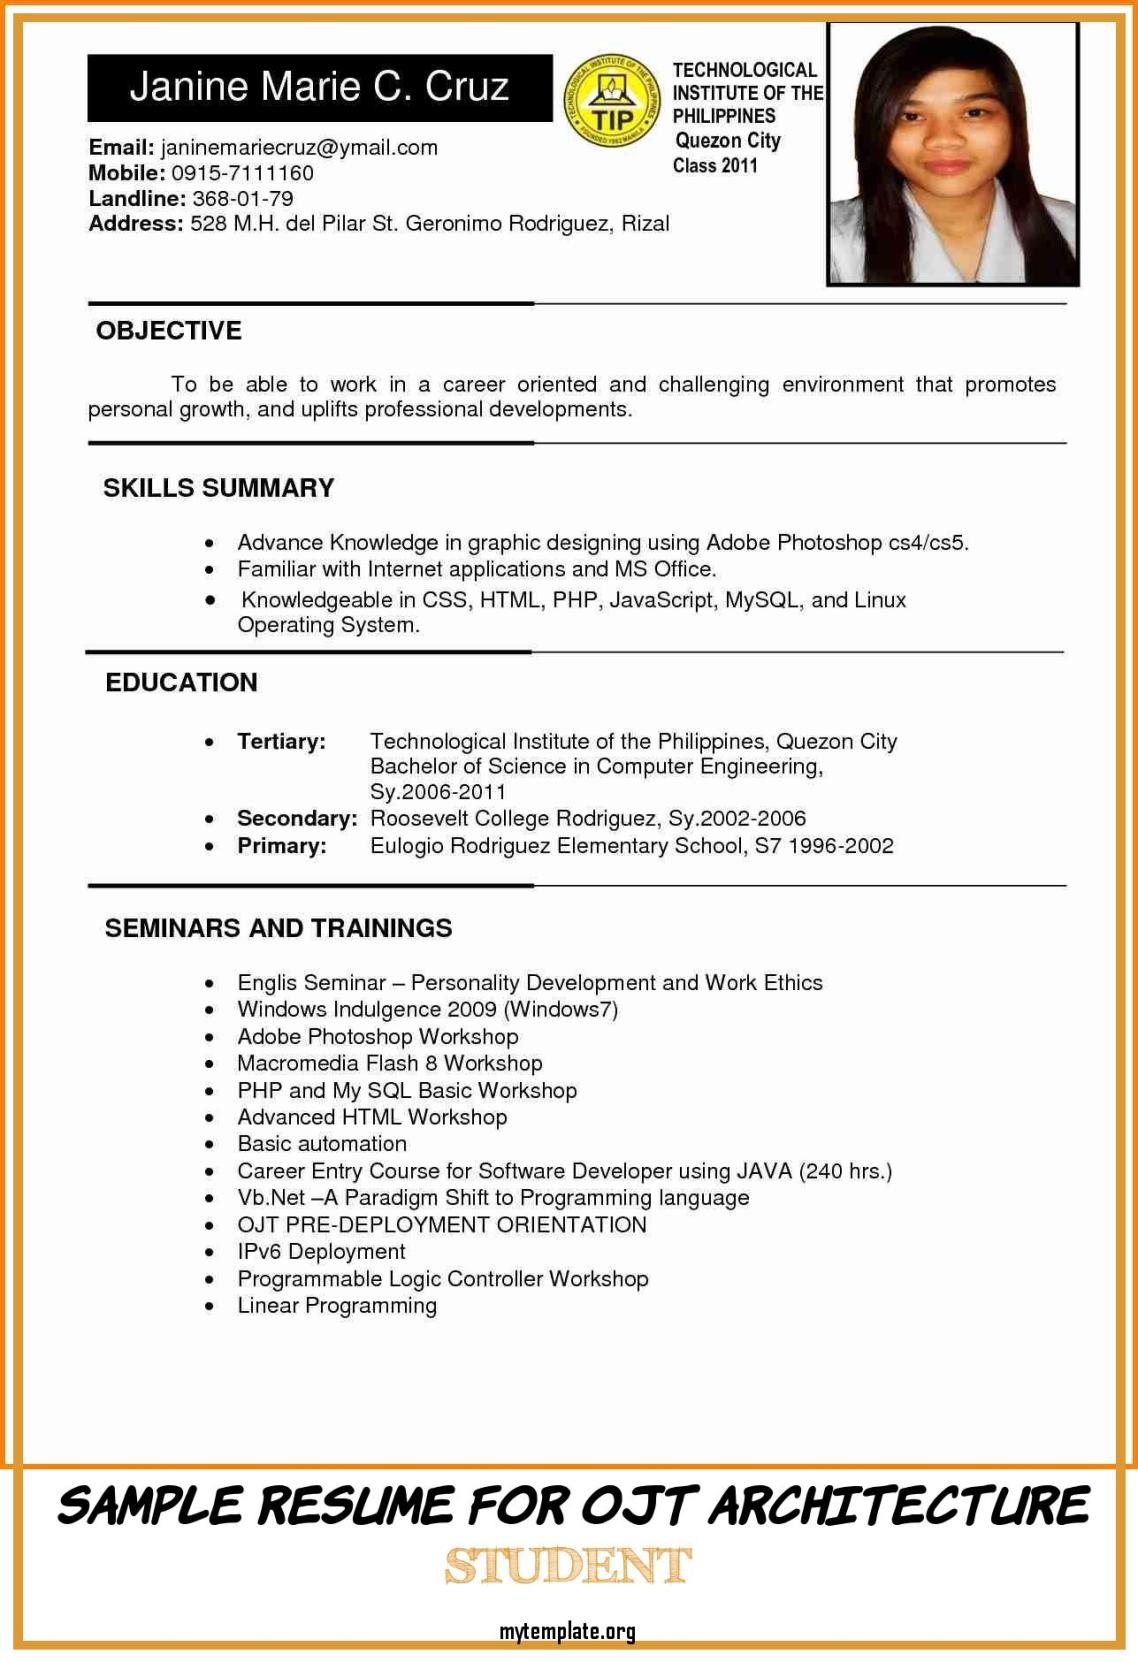 Sample Resume for Ojt Architecture Student Of Resume ...